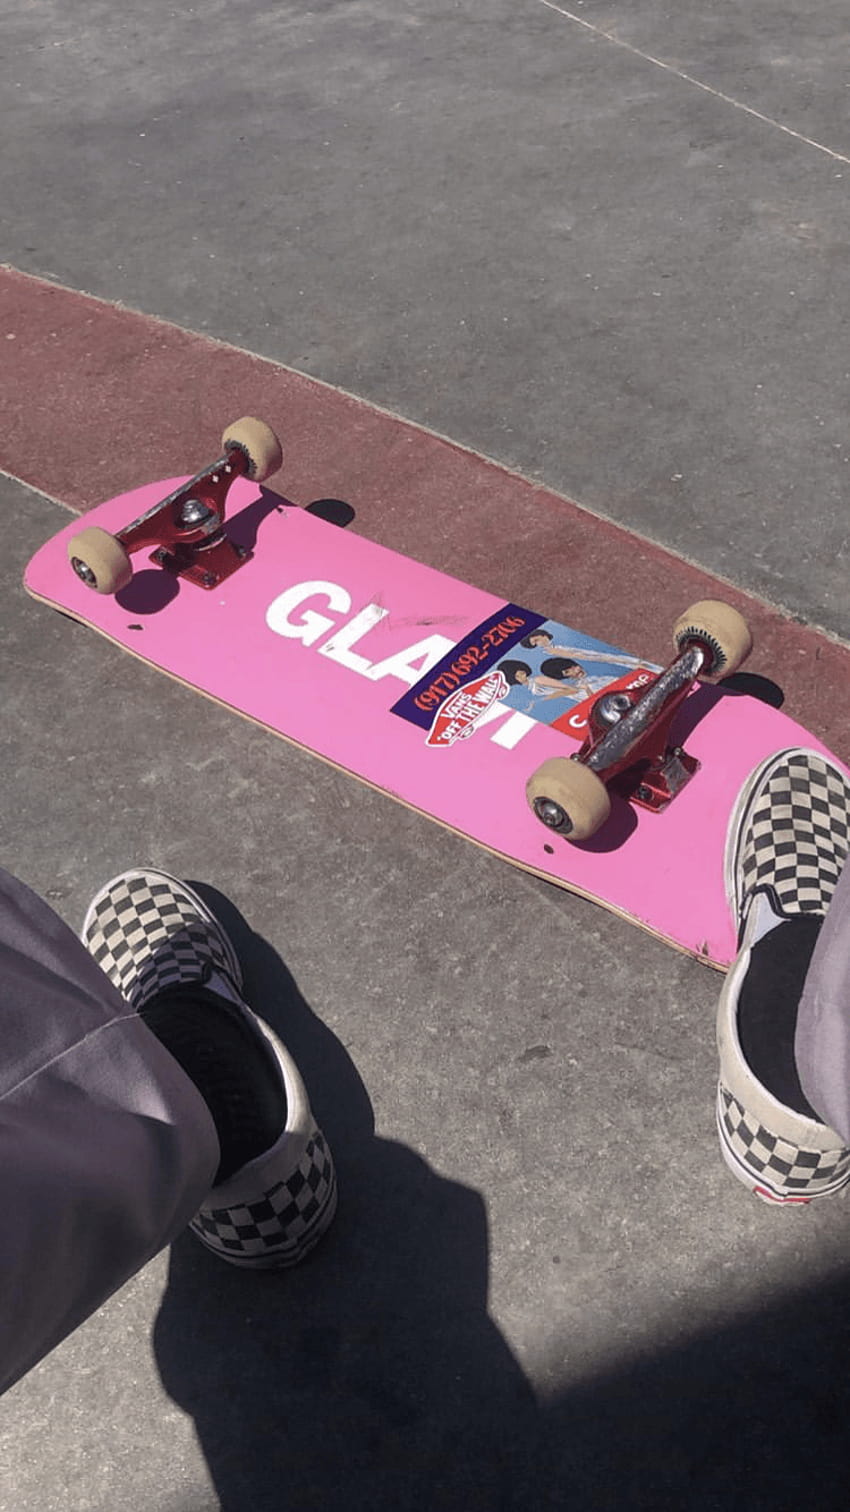 A person's feet in checkered shoes standing next to a pink skateboard. - Skate, skater